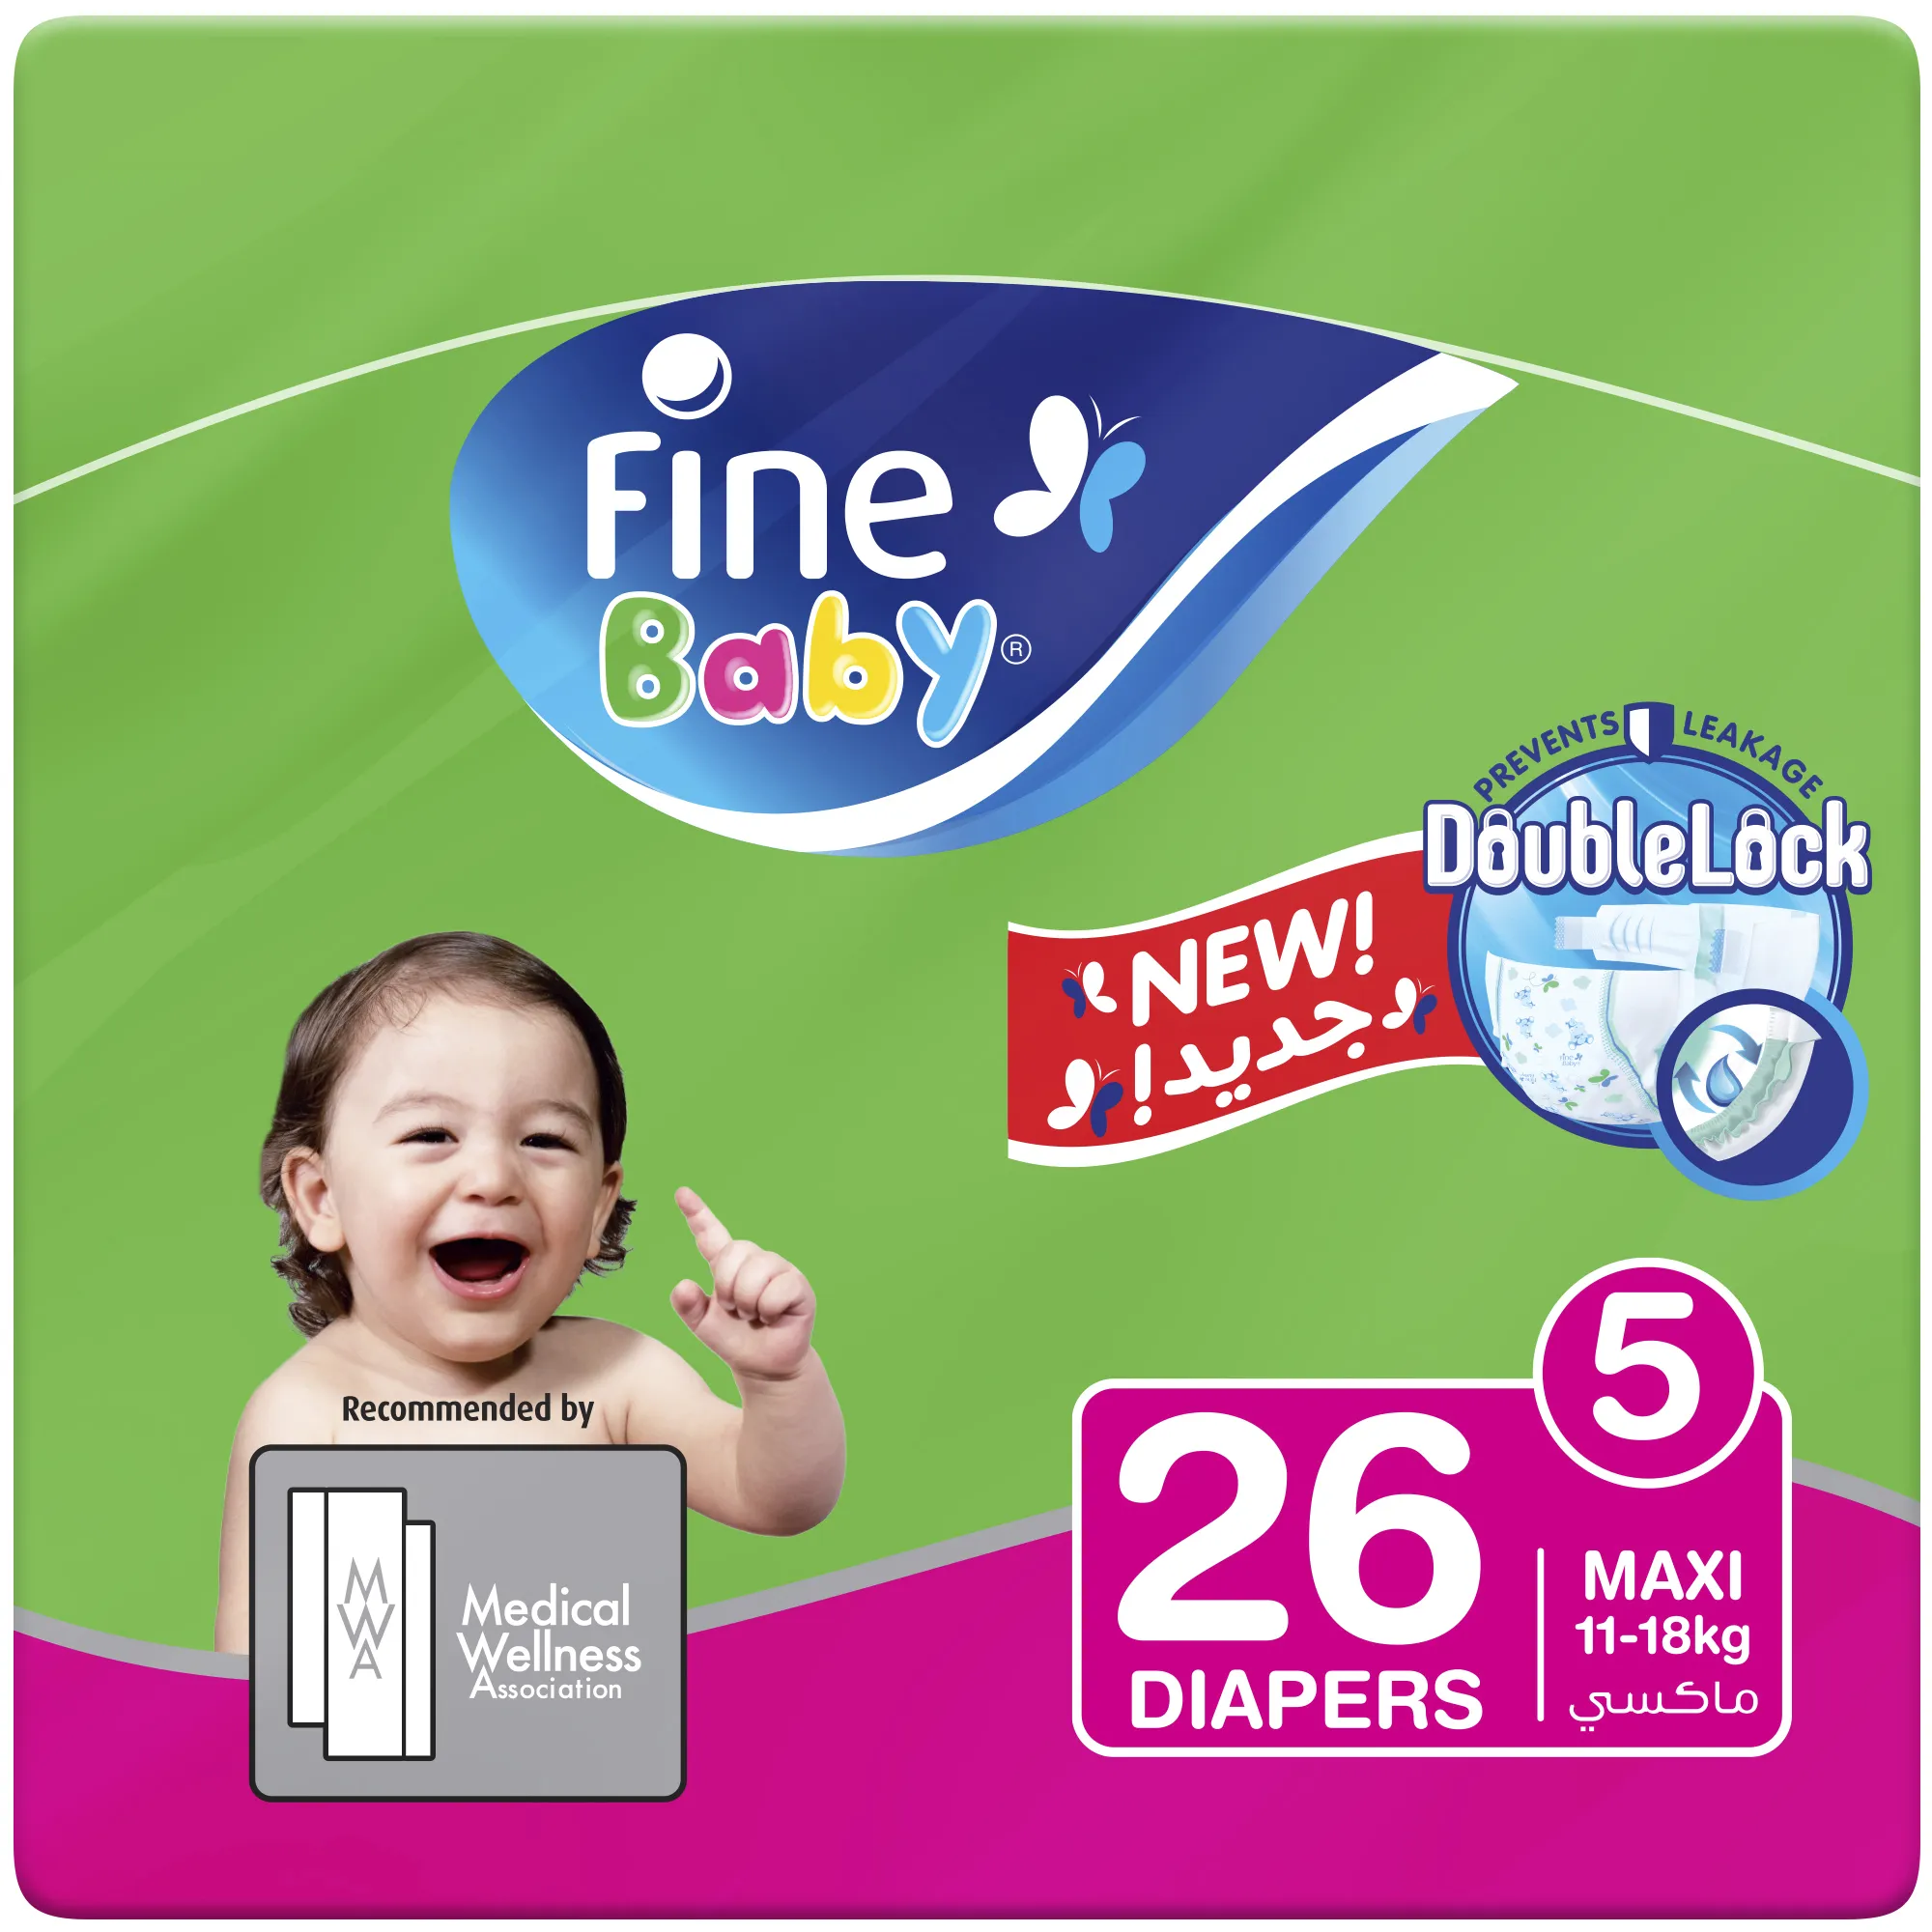 Fine Baby Diapers, Size 5, Maxi 11 18kg, Economy Pack of 26 diapers